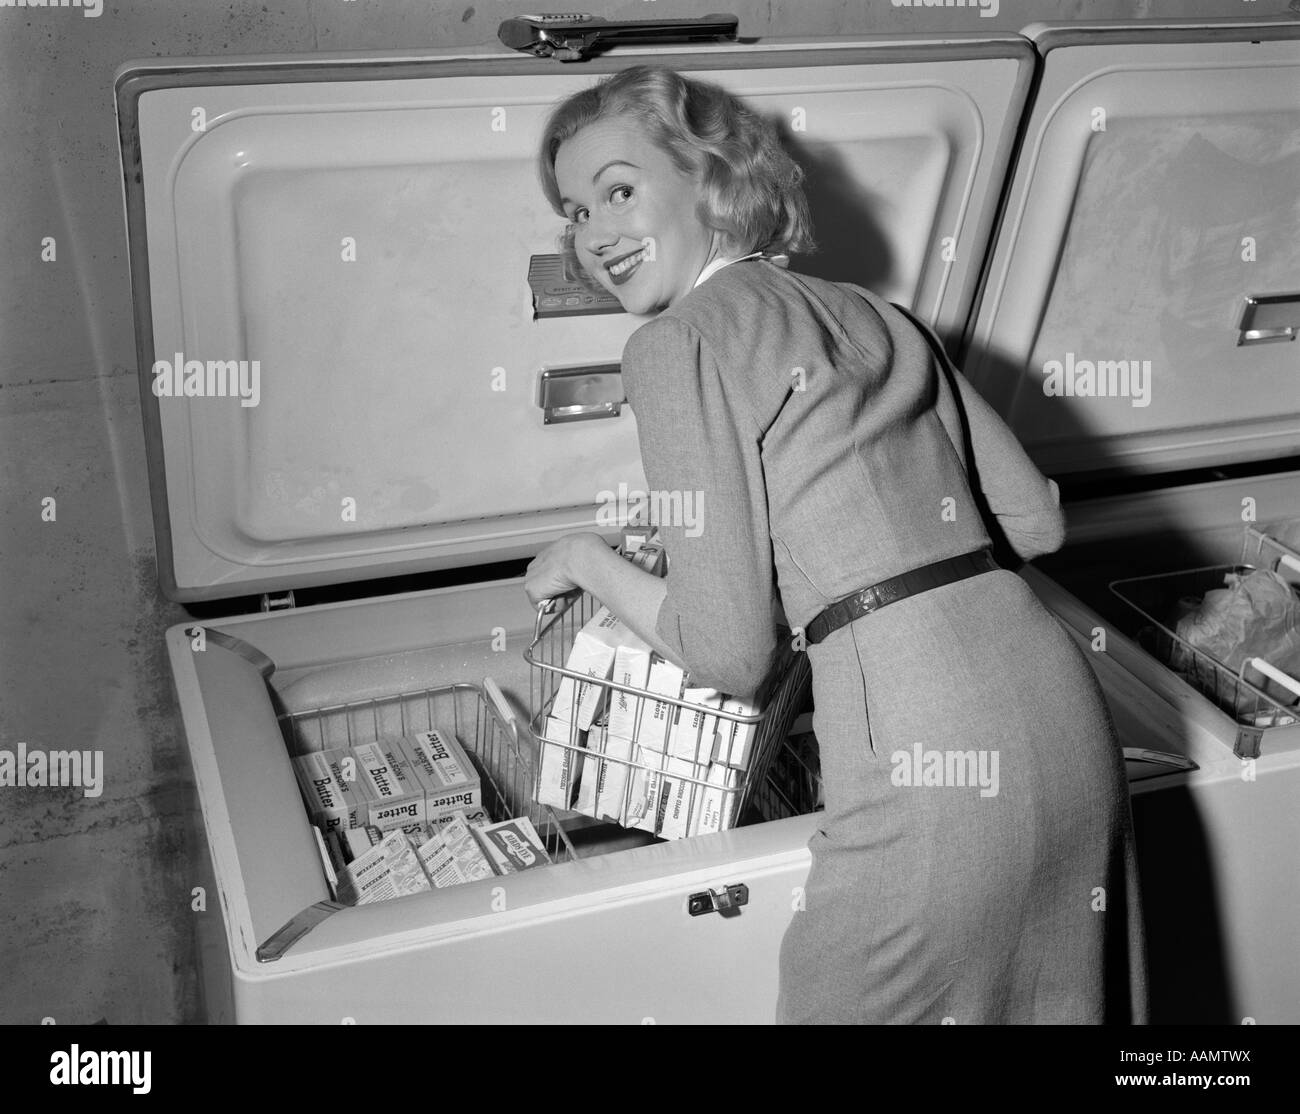 1950s BLOND WOMAN LIFTING WIRE BASKET FOOD ITEMS FROM A DEEP FREEZER LOOKING AT CAMERA OVER HER SHOULDER Stock Photo